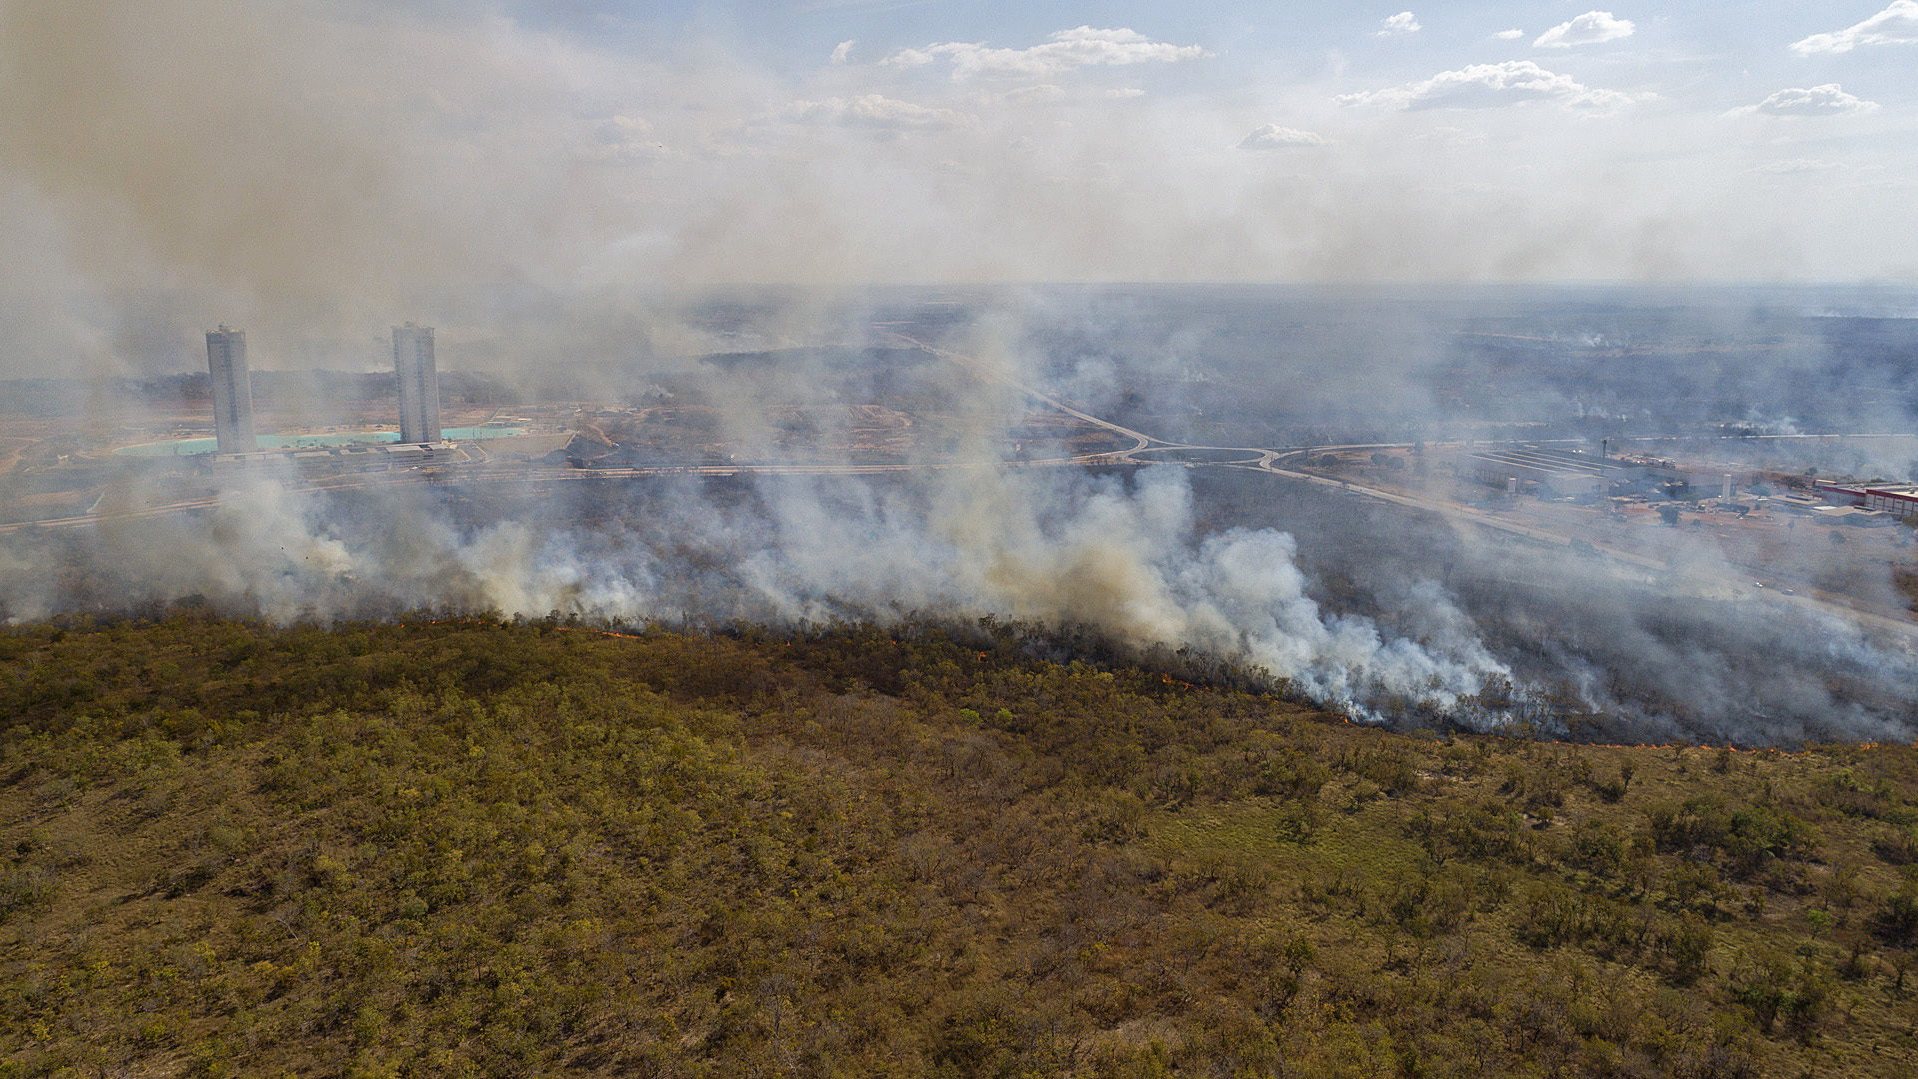 epa08604331 Aerial view of a forest fire near the city of Cuiaba, in the state of Mato Grosso, Brazil, 14 August 2020. The Brazilian Amazon, which is home to the largest tropical forest in the world, is on its way to close 2020 with a record of devastated area, after the so-called &#039;deforestation alerts&#039; have grown by 33% in the year-on-year period that ended last July. The Brazilian Pantanal, a biodiversity sanctuary located in the southern Amazon, faces similar threats.  EPA/ROGERIO FLORENTINO